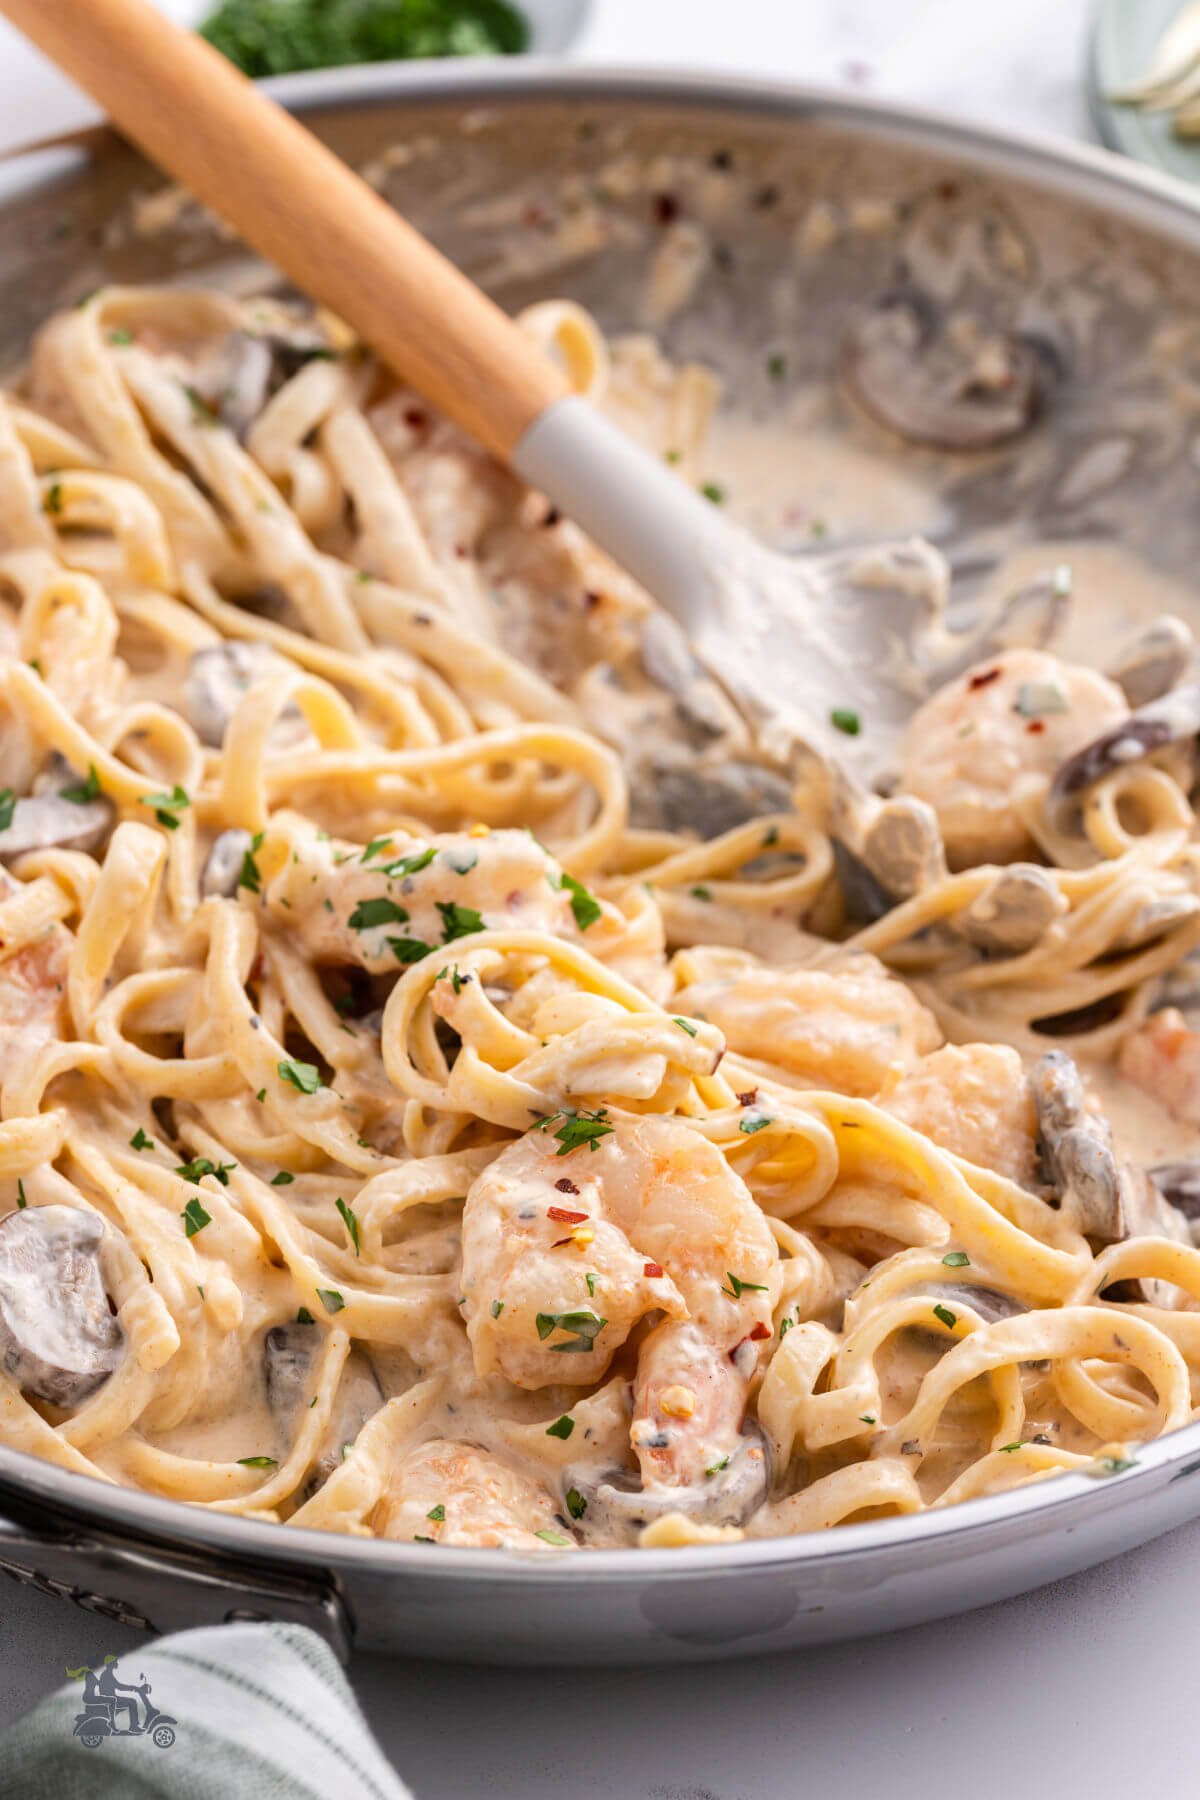 Pasta forks stirring the fettuccine and shrimp in a cream sauce. 